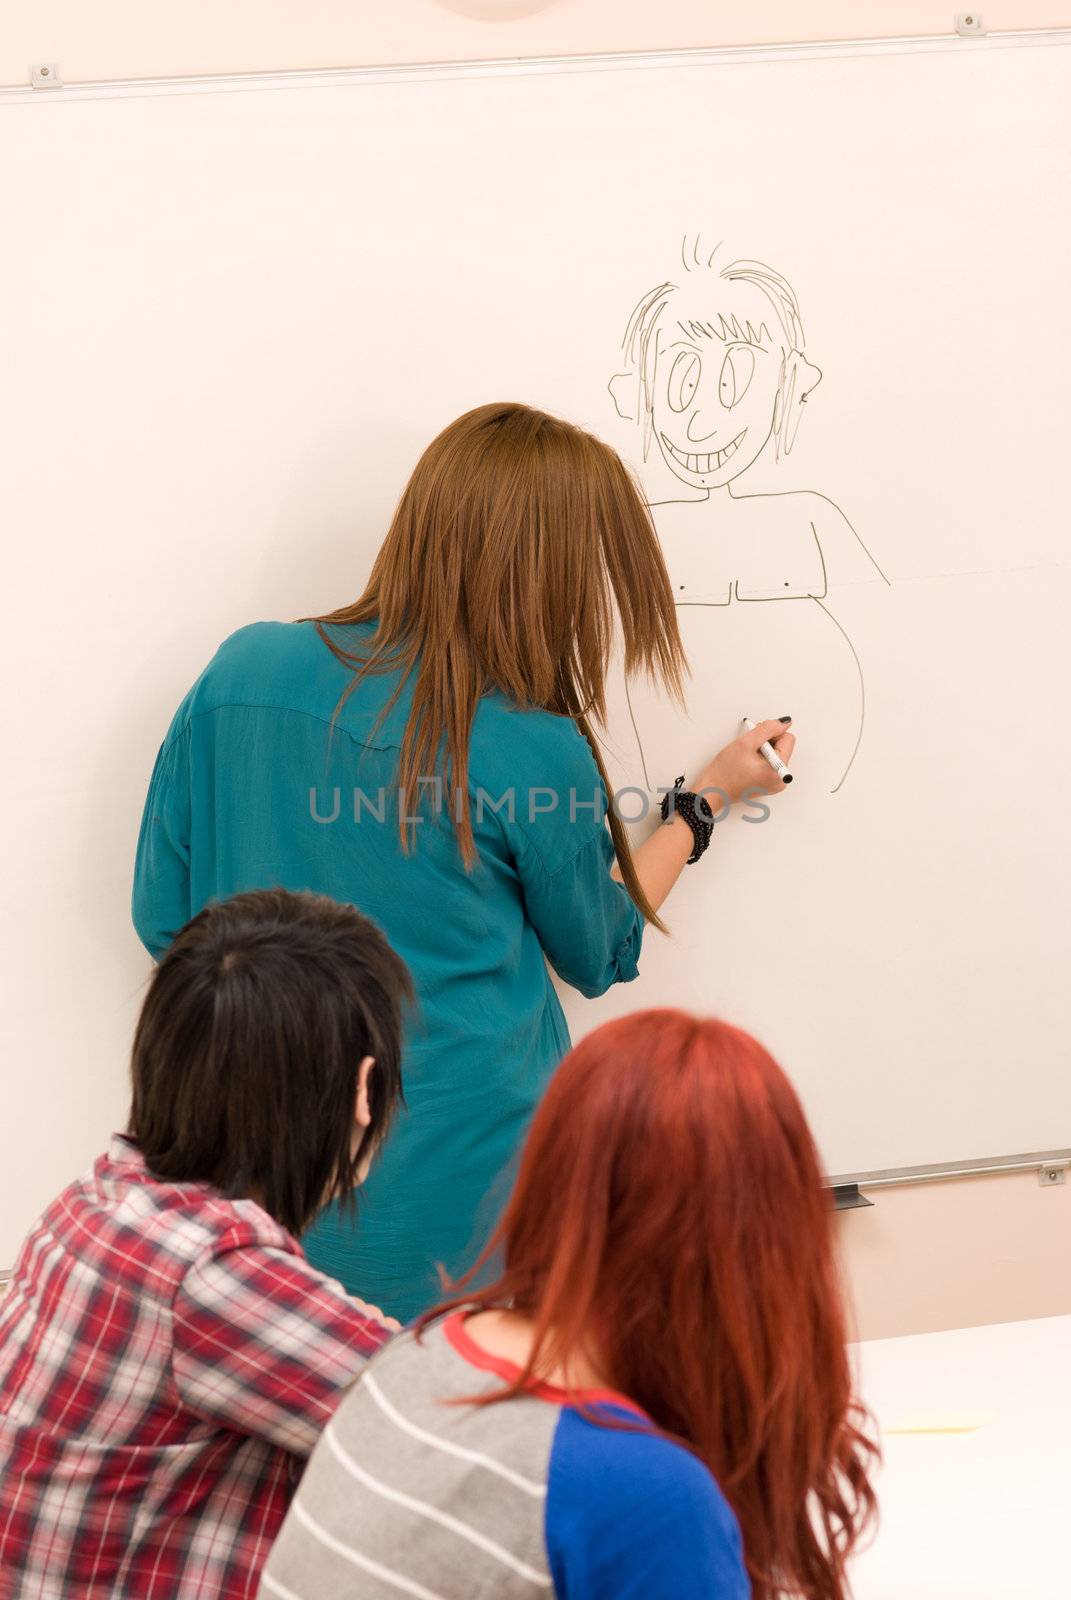 She is drawing a cartoon on the board